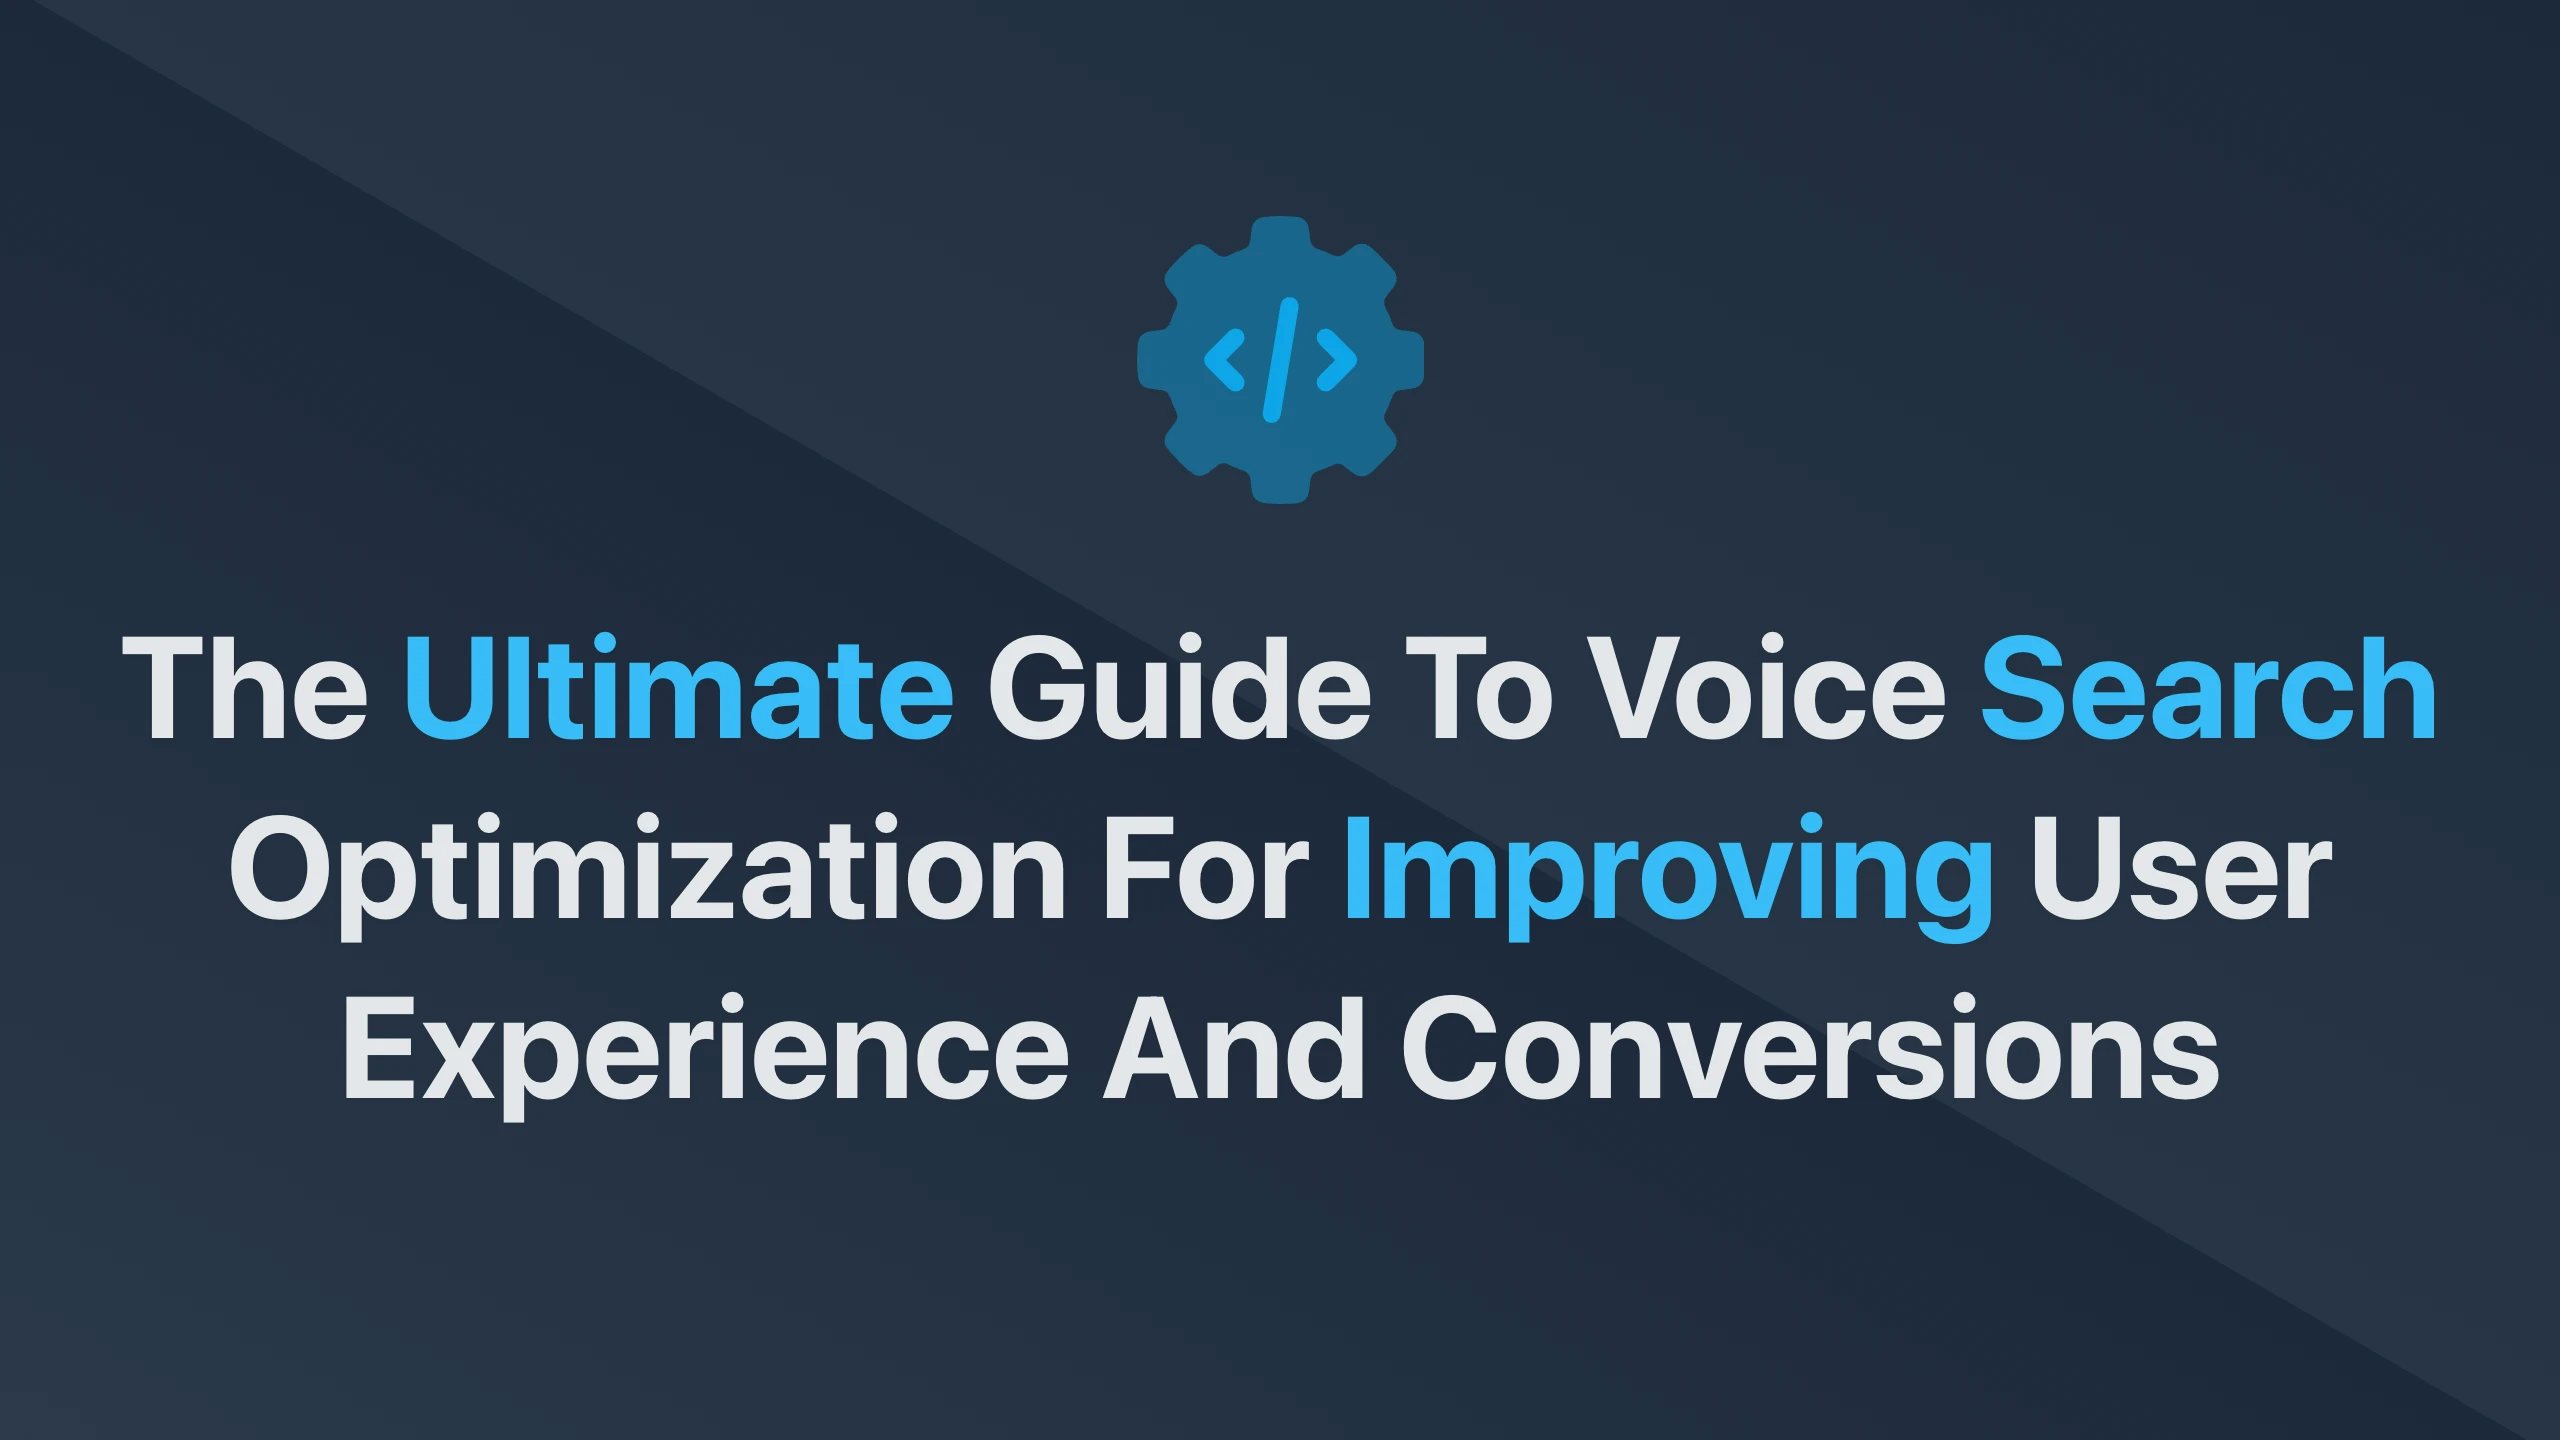 Cover Image for The Ultimate Guide to Voice Search Optimization for Improving User Experience and Conversions